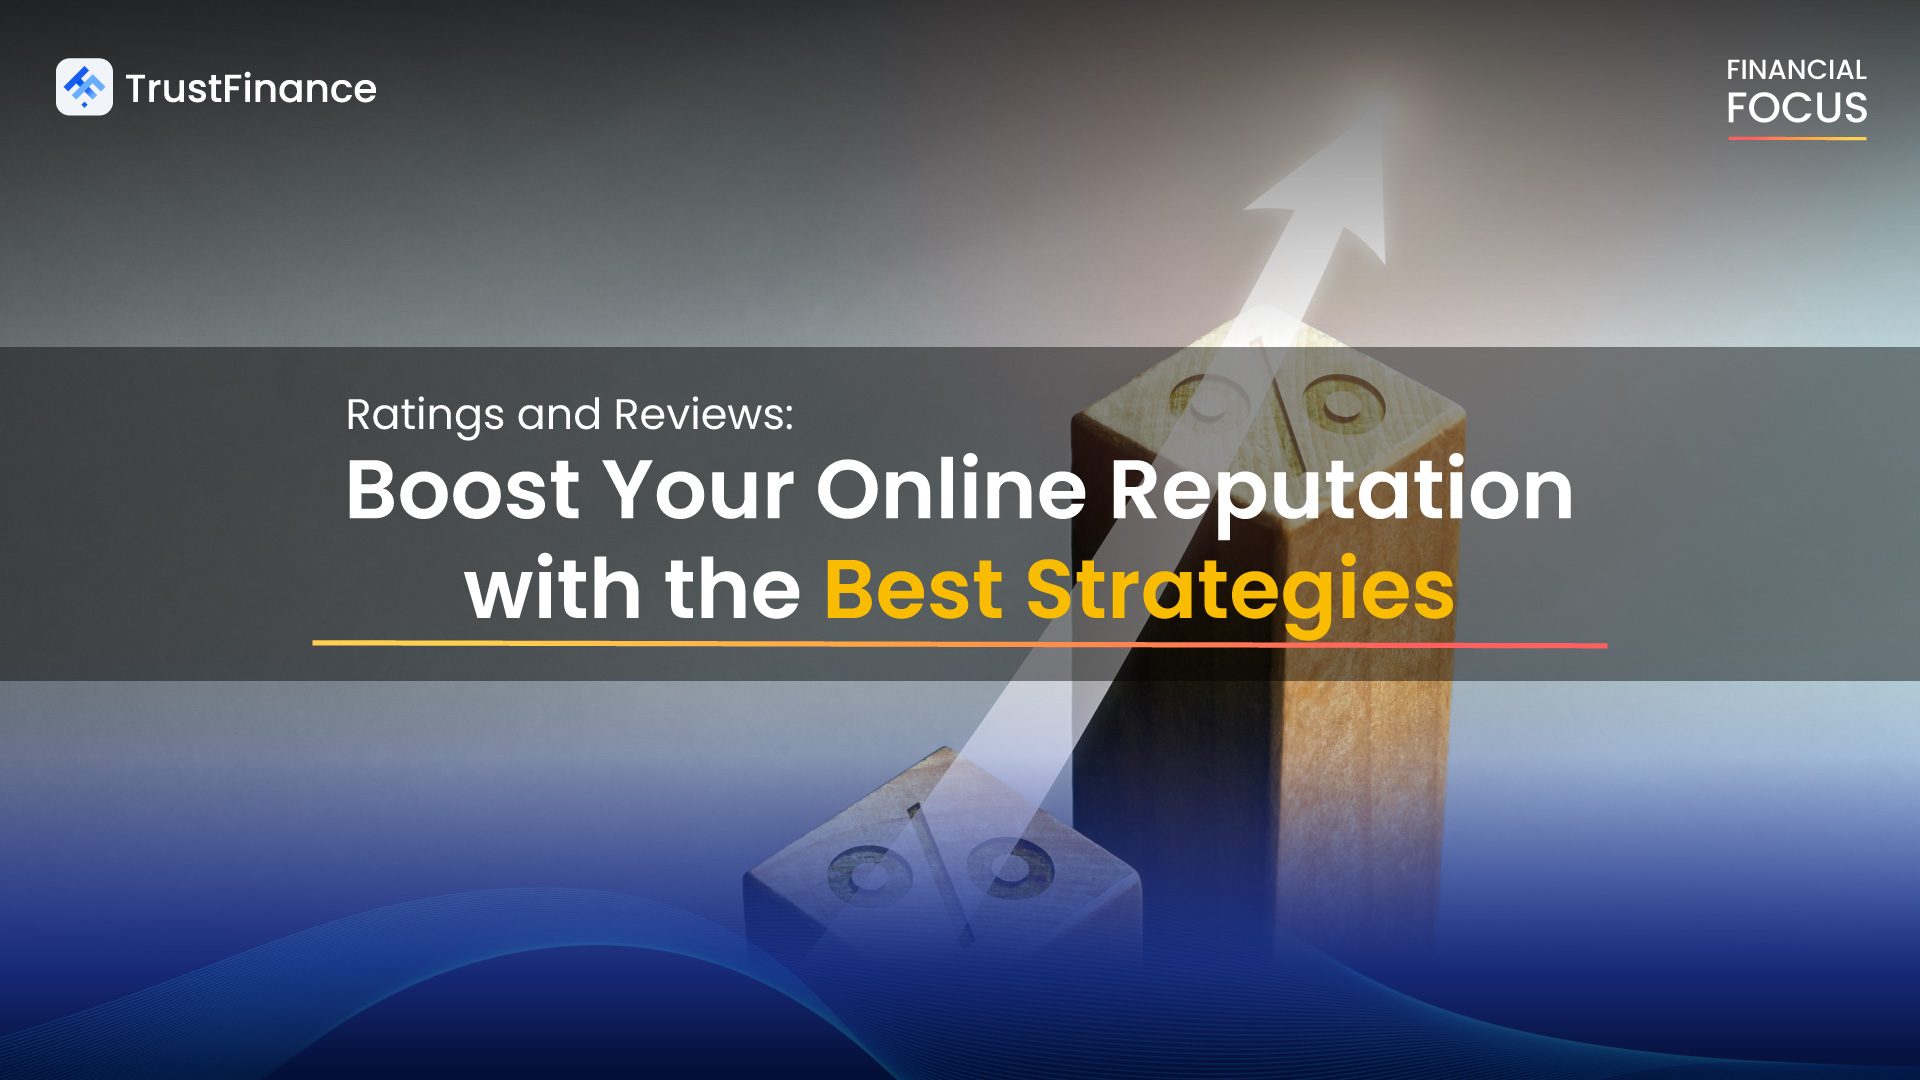 Ratings and Reviews: Boost Your Online Reputation with the Best Strategies